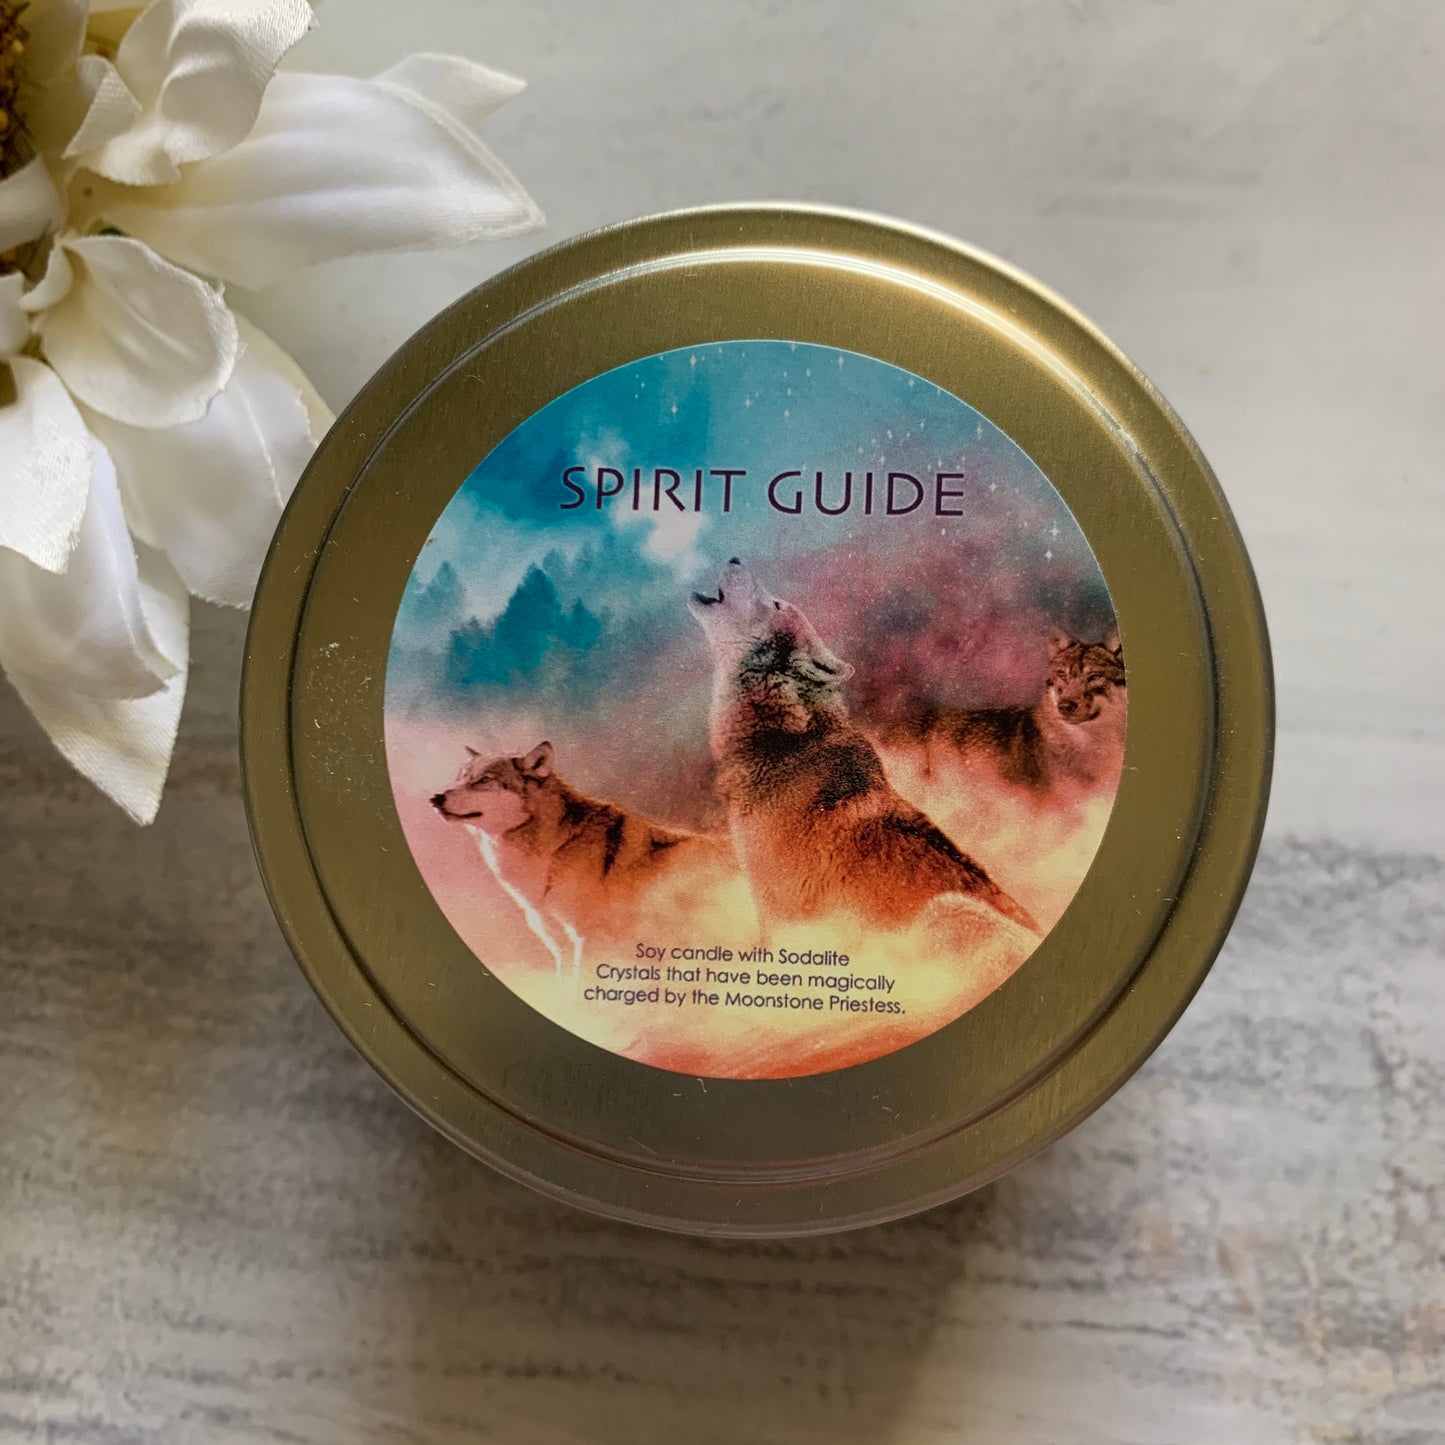 Spirit Guide Magical Candle with Sodalite Crystals